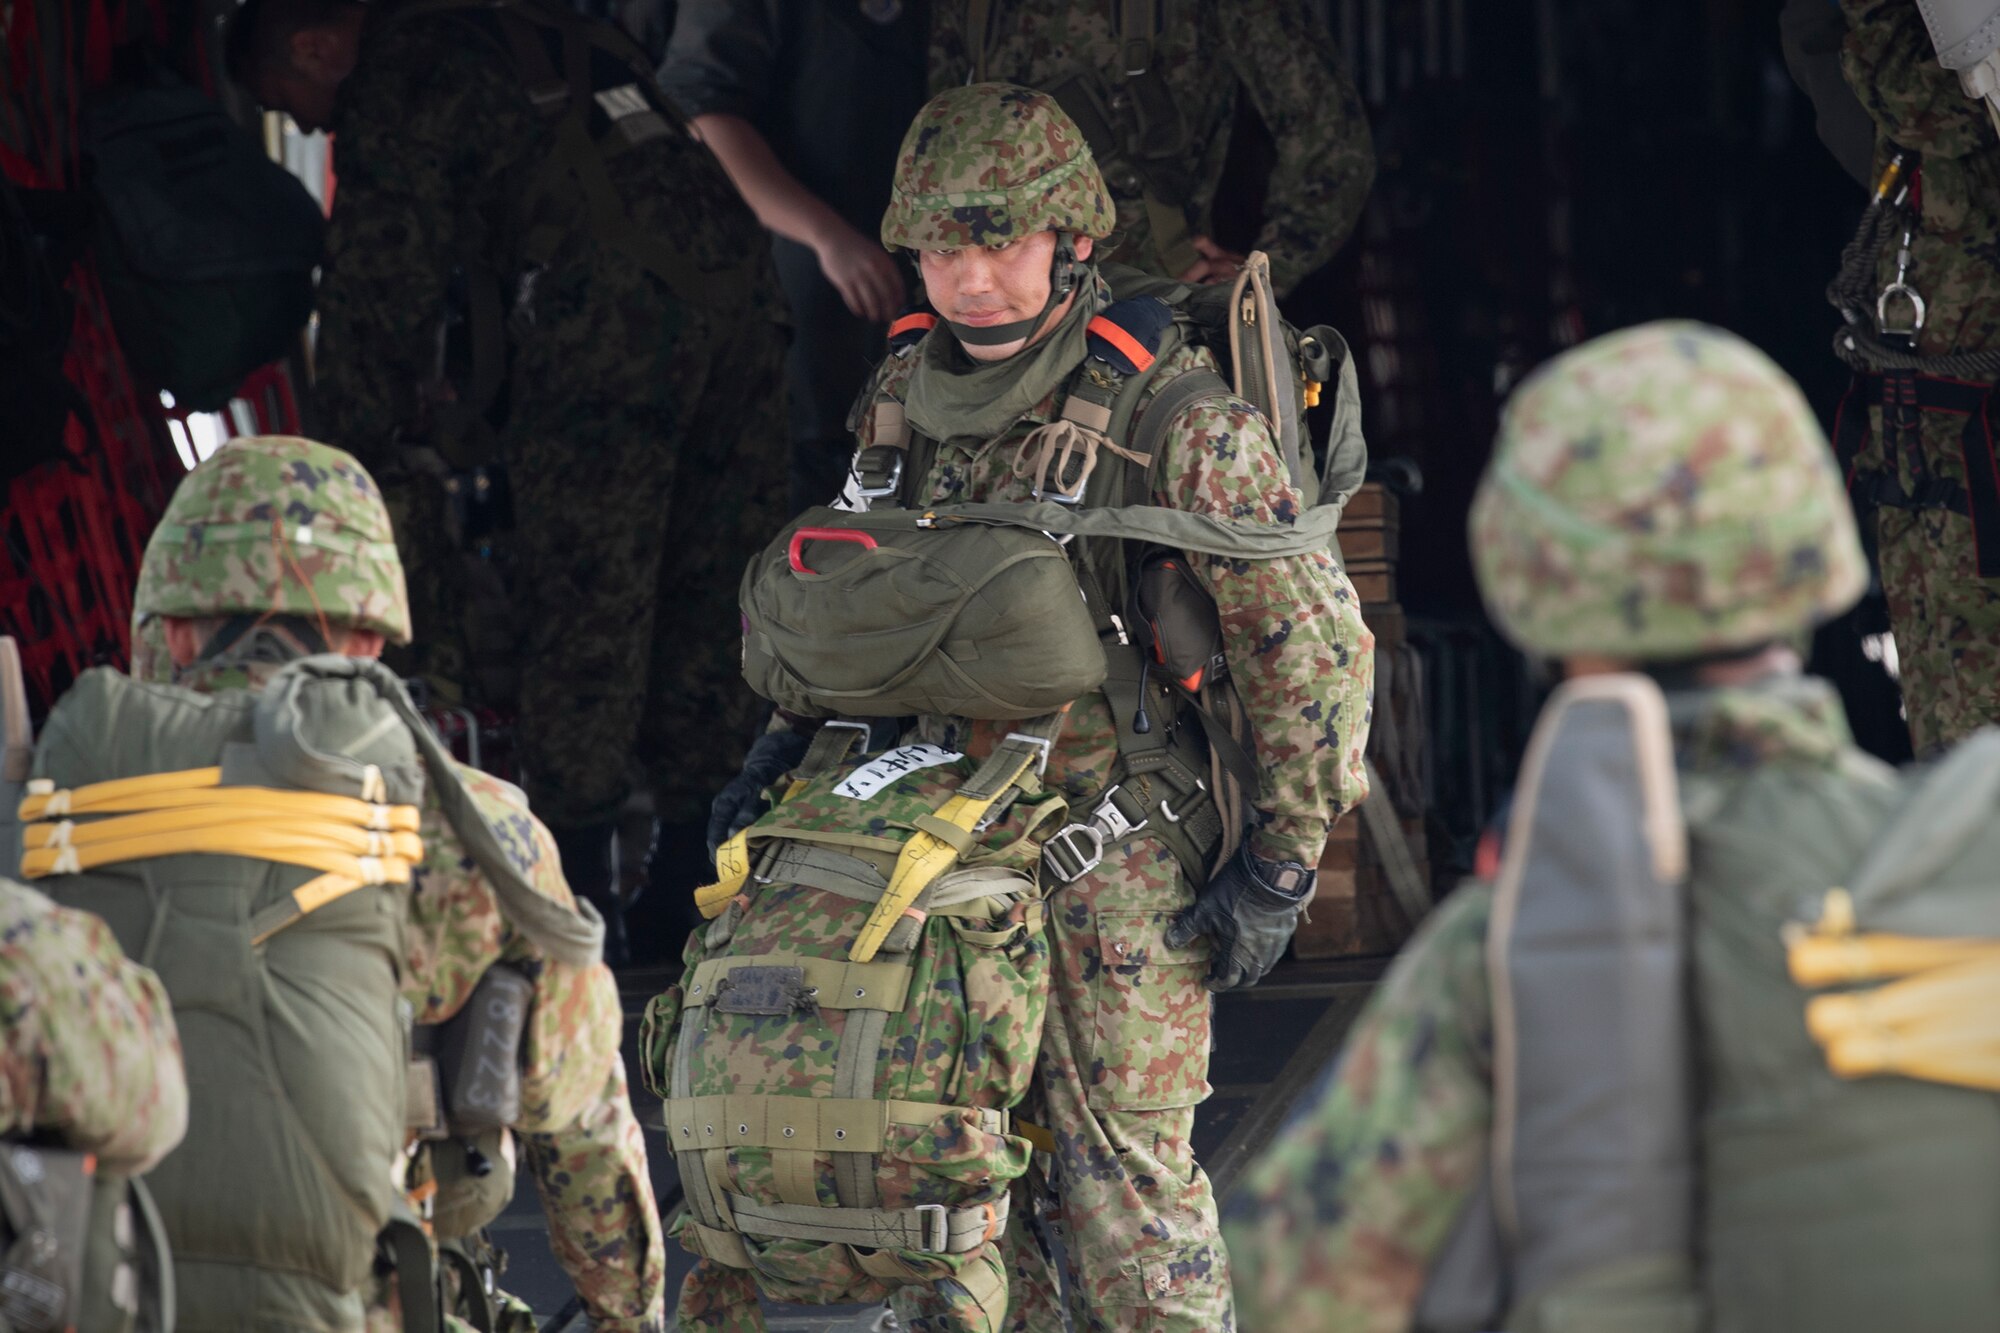 A Japan Ground Self-Defense Force soldier assigned to the 1st Airborne Brigade